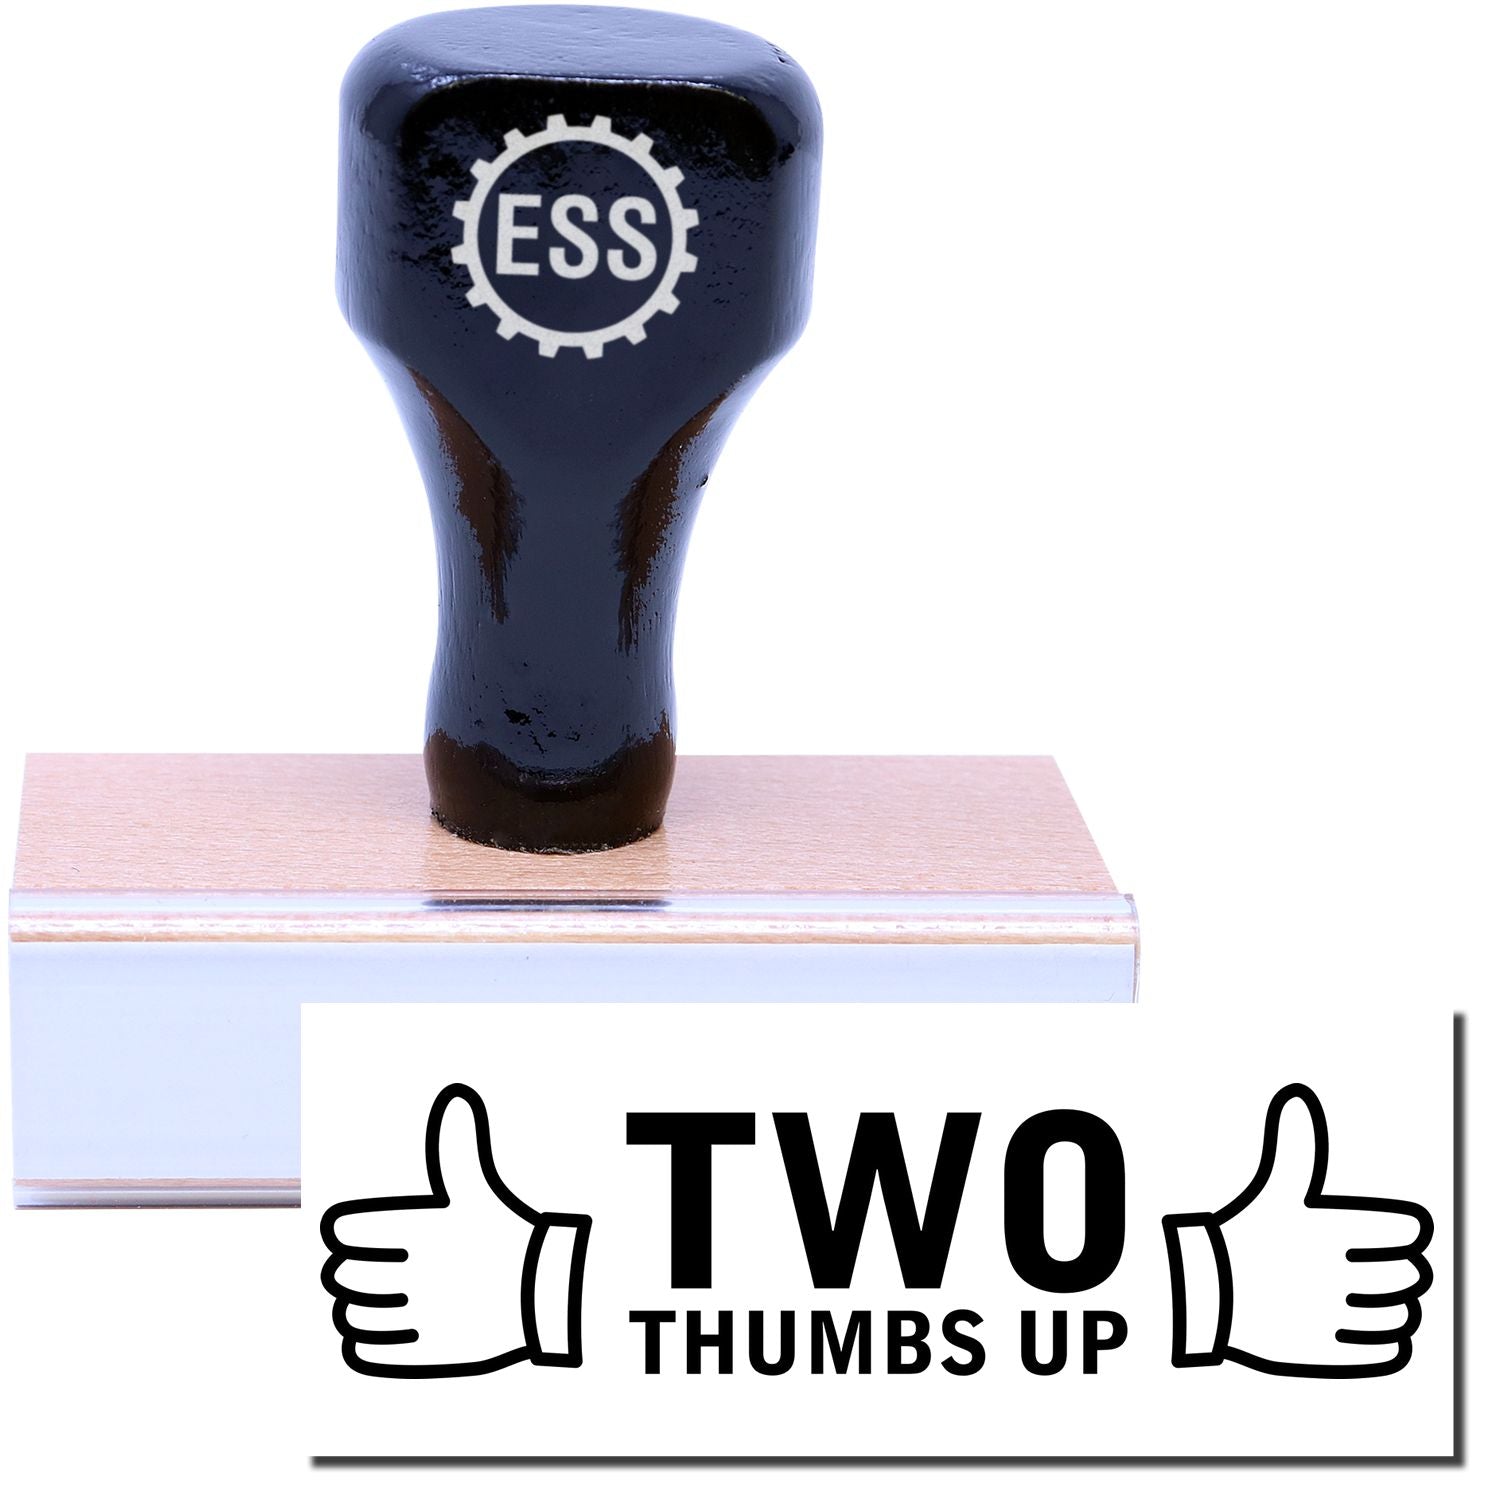 A stock office rubber stamp with a stamped image showing how the text "TWO THUMBS UP" in a large font with two thumbs pointing up on each side of the text is displayed after stamping.